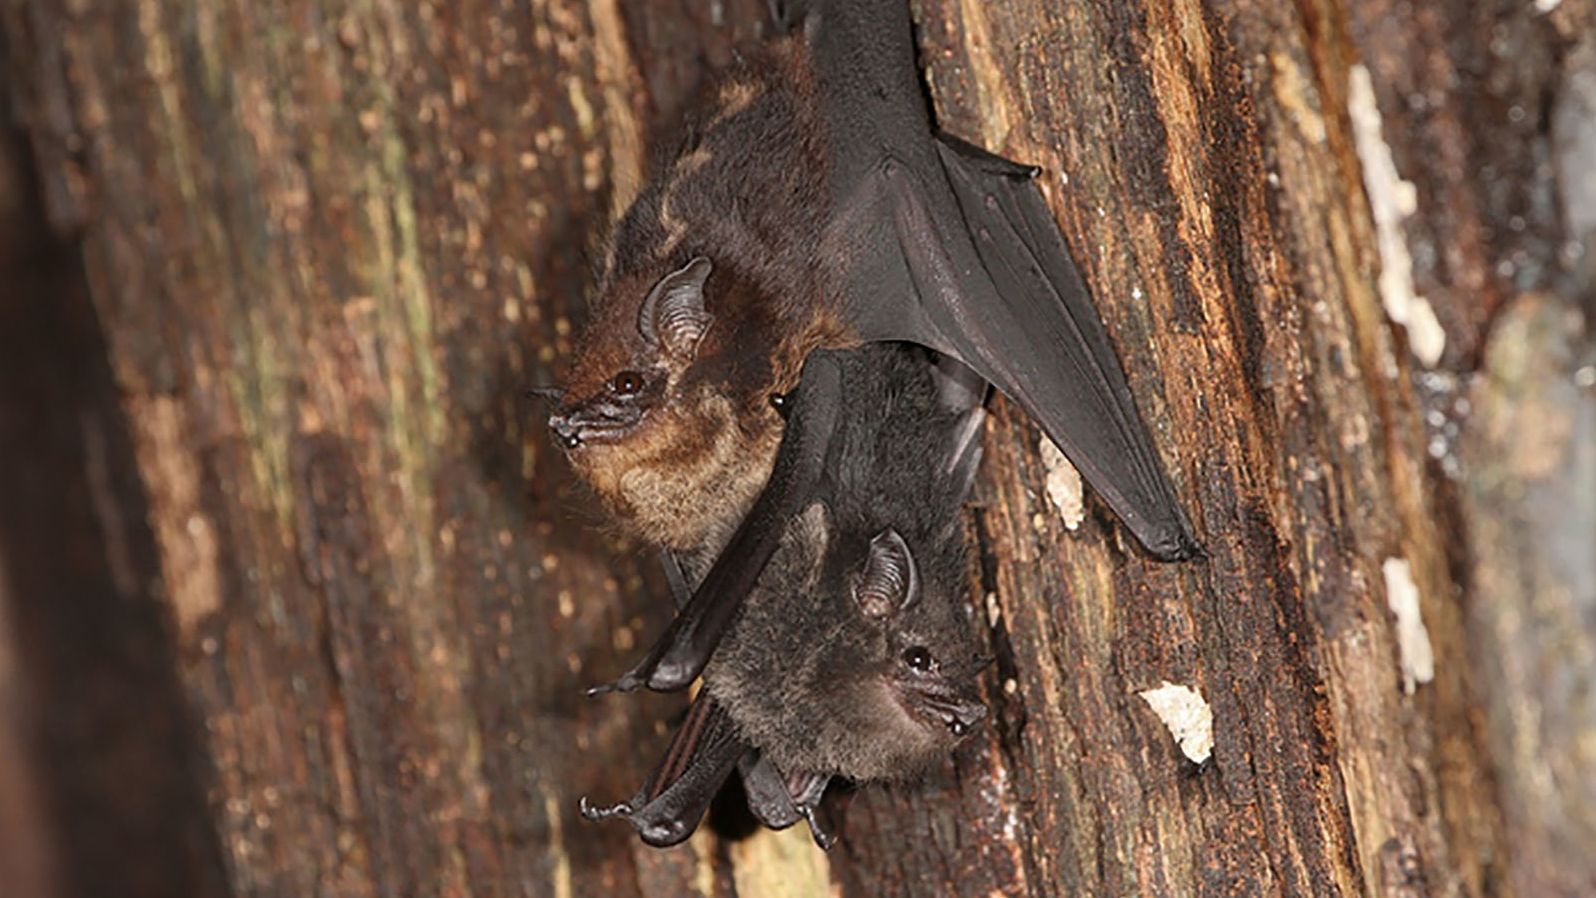 Saccopteryx bilineata bat pups, such as the one shown here (bottom) with its mother, engage in babbling when learning to communicate. 